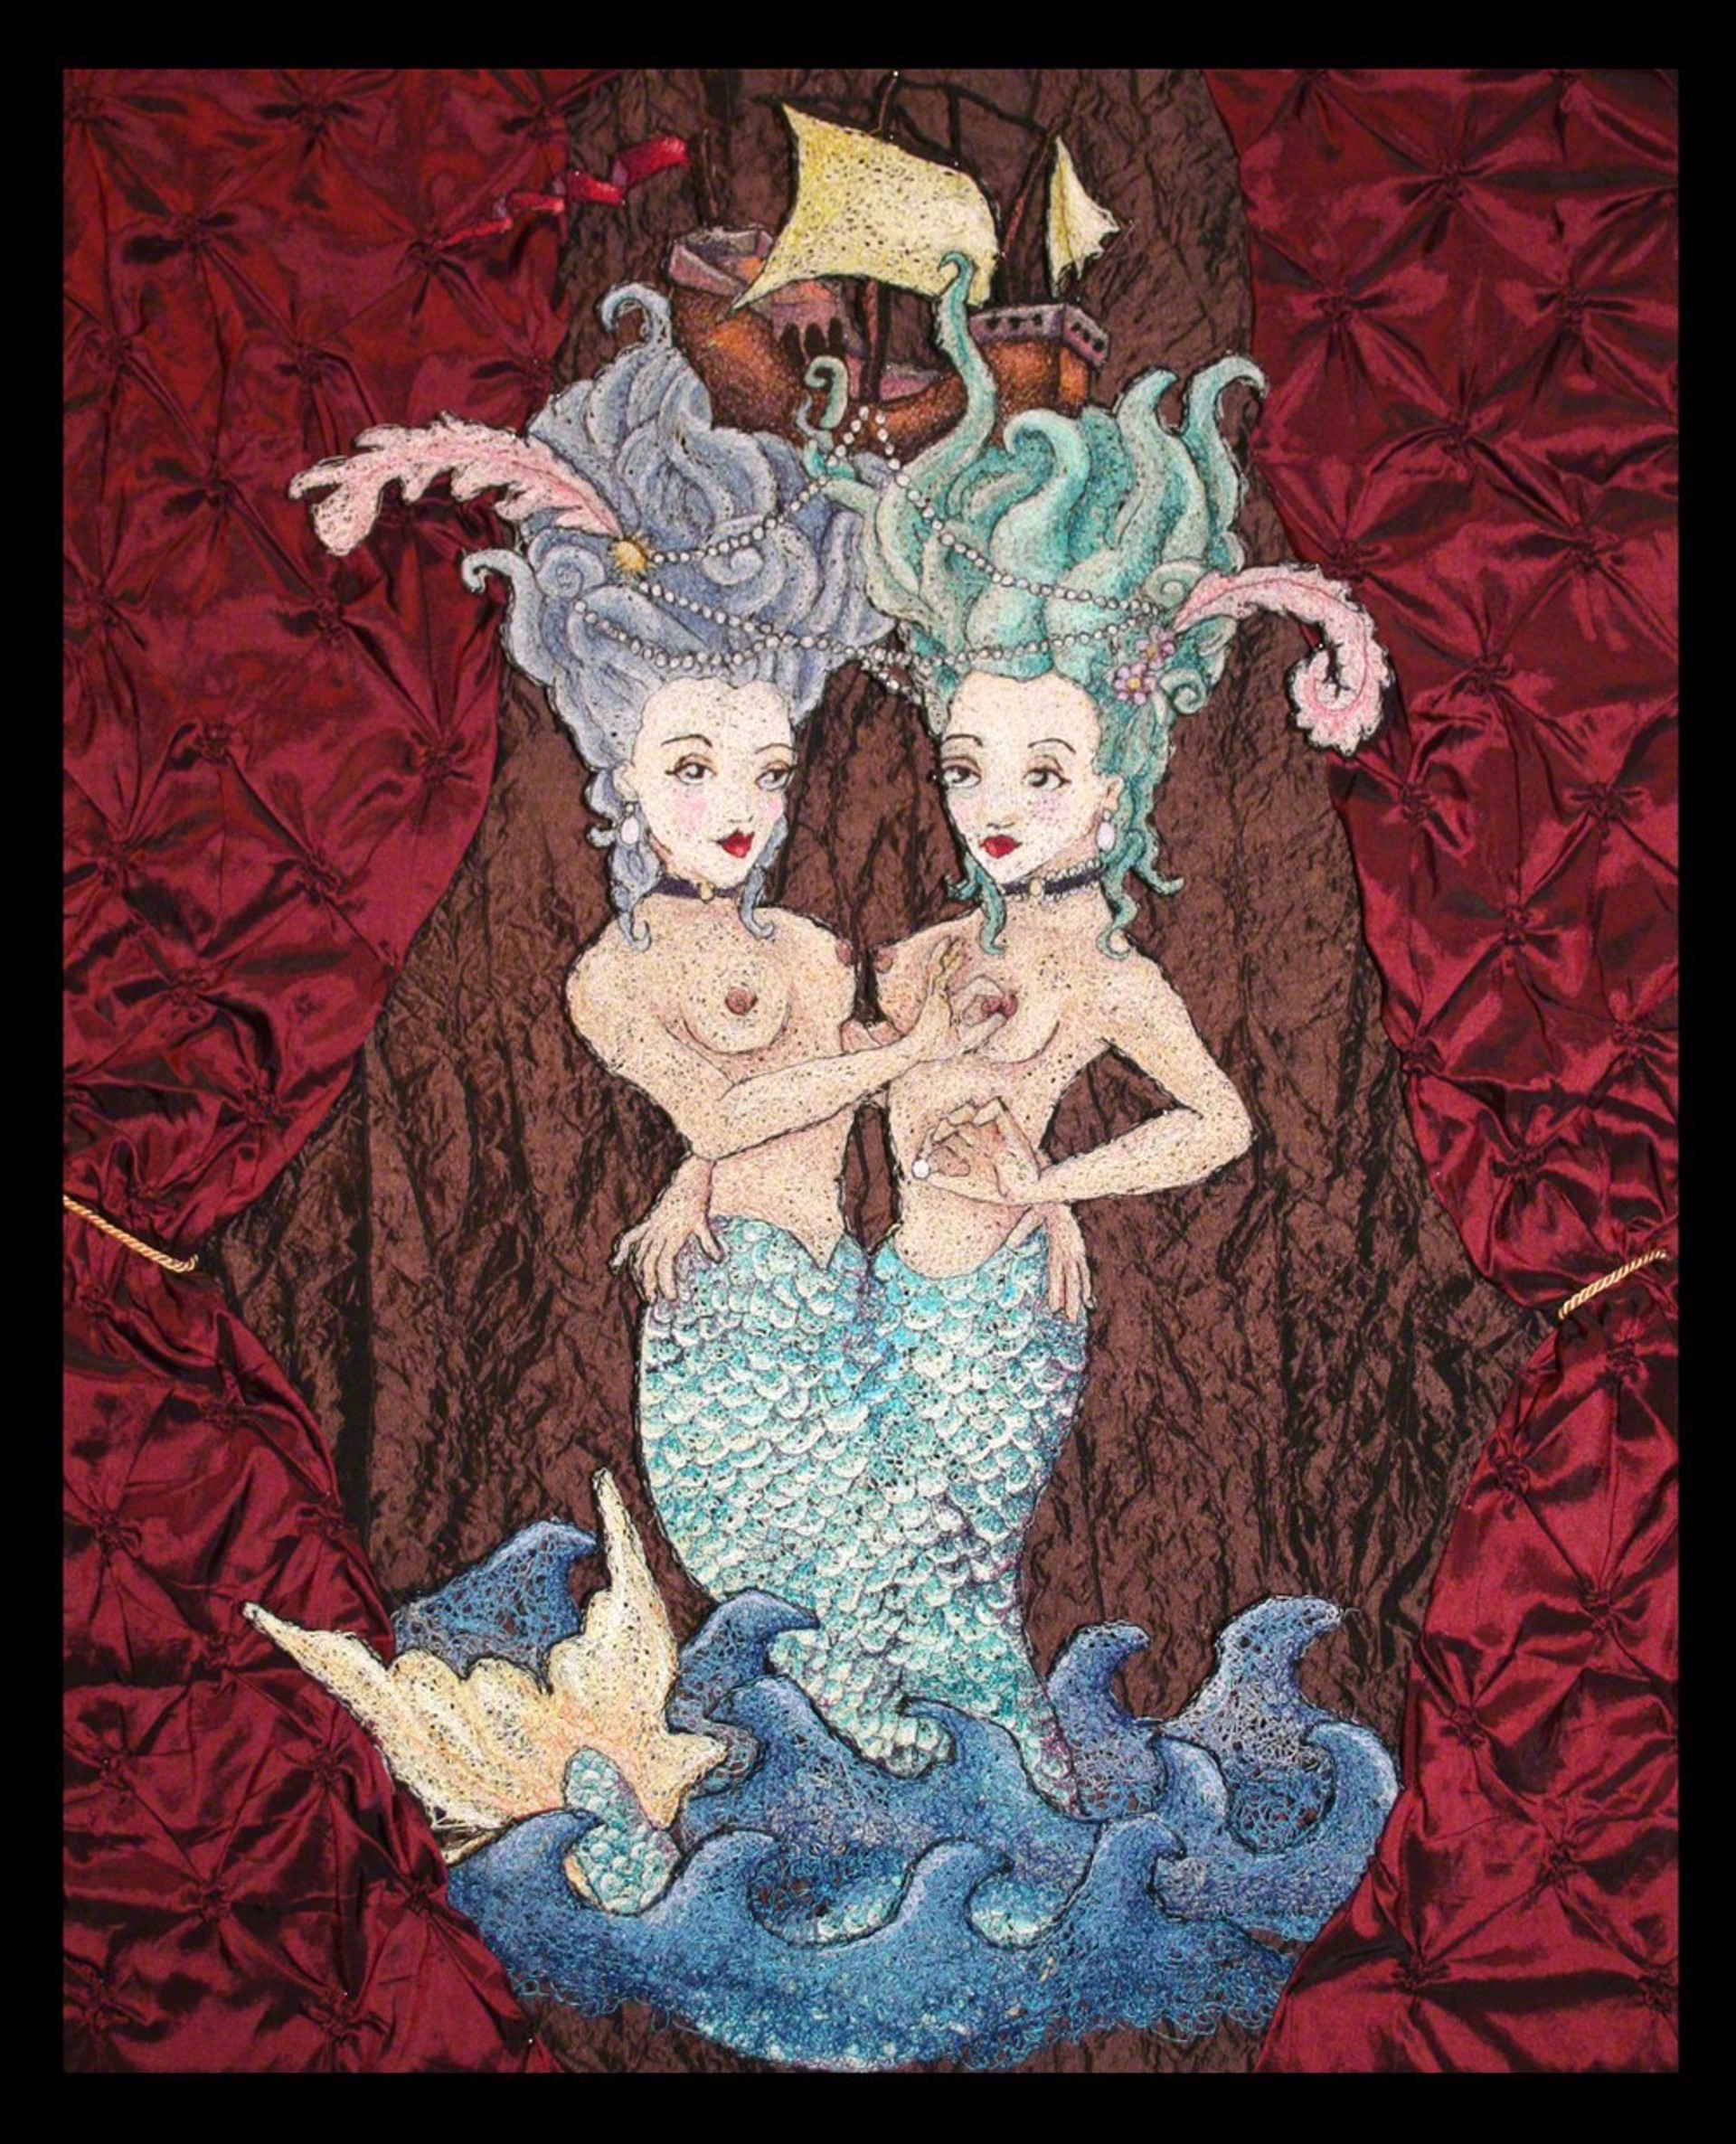 Fifi and Fleur, Sideshow Marvels by Theresa Honeywell